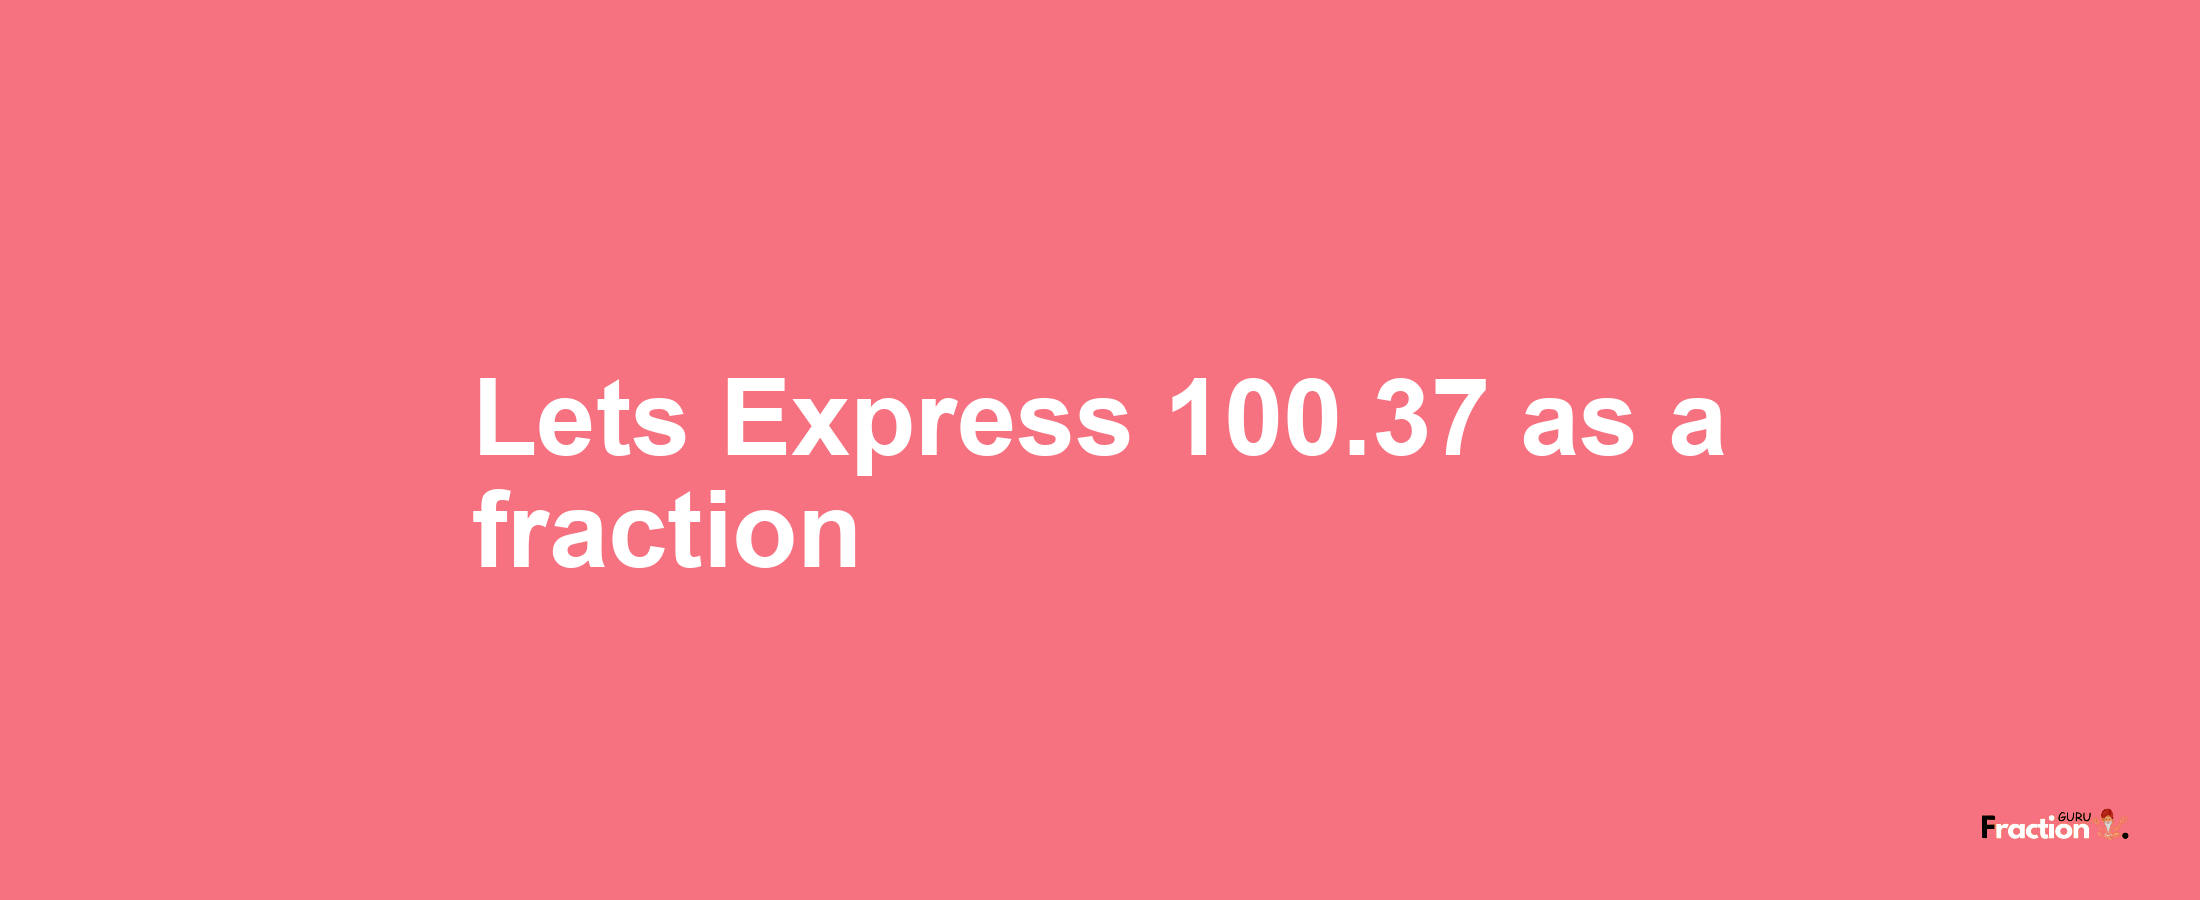 Lets Express 100.37 as afraction